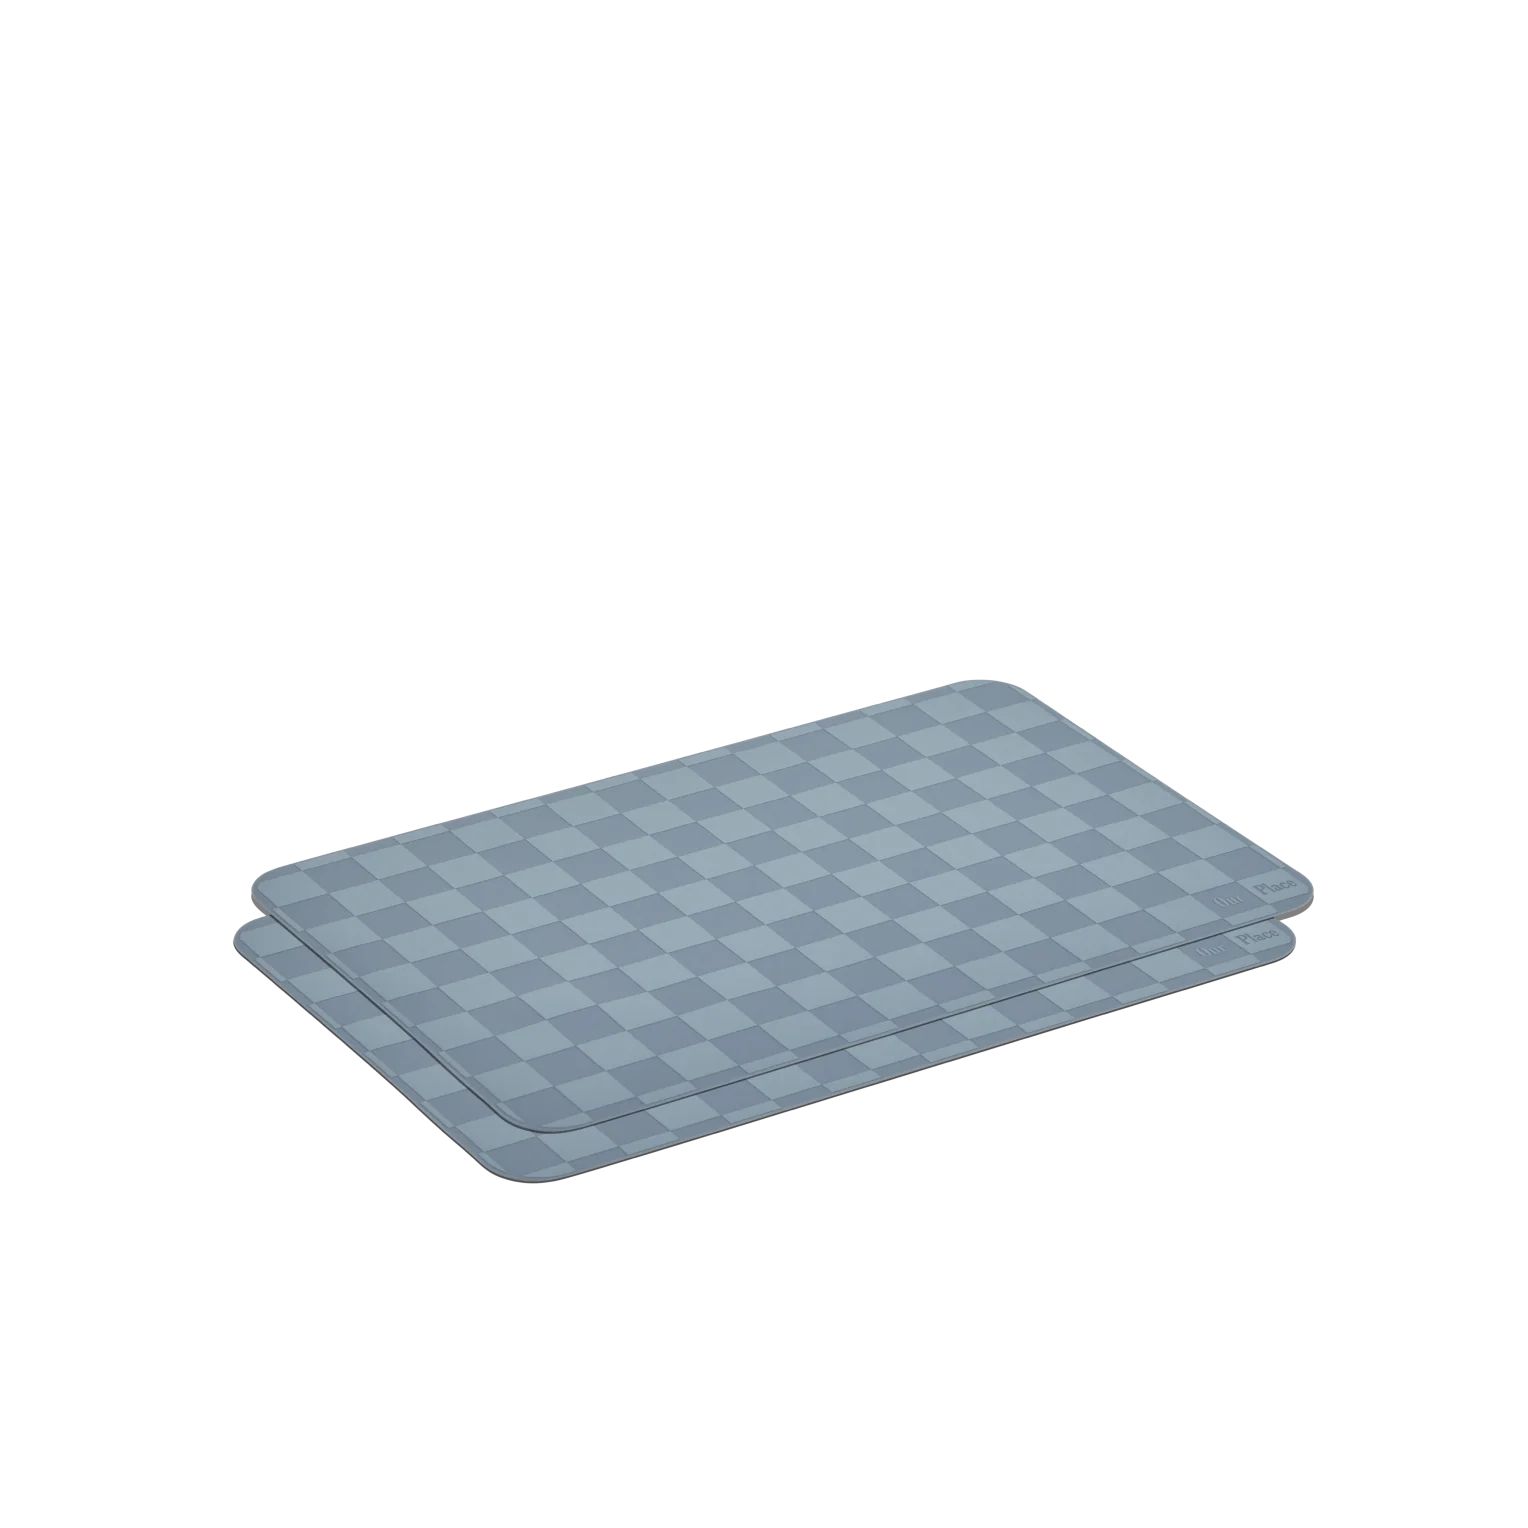 Oven Mats | Our Place